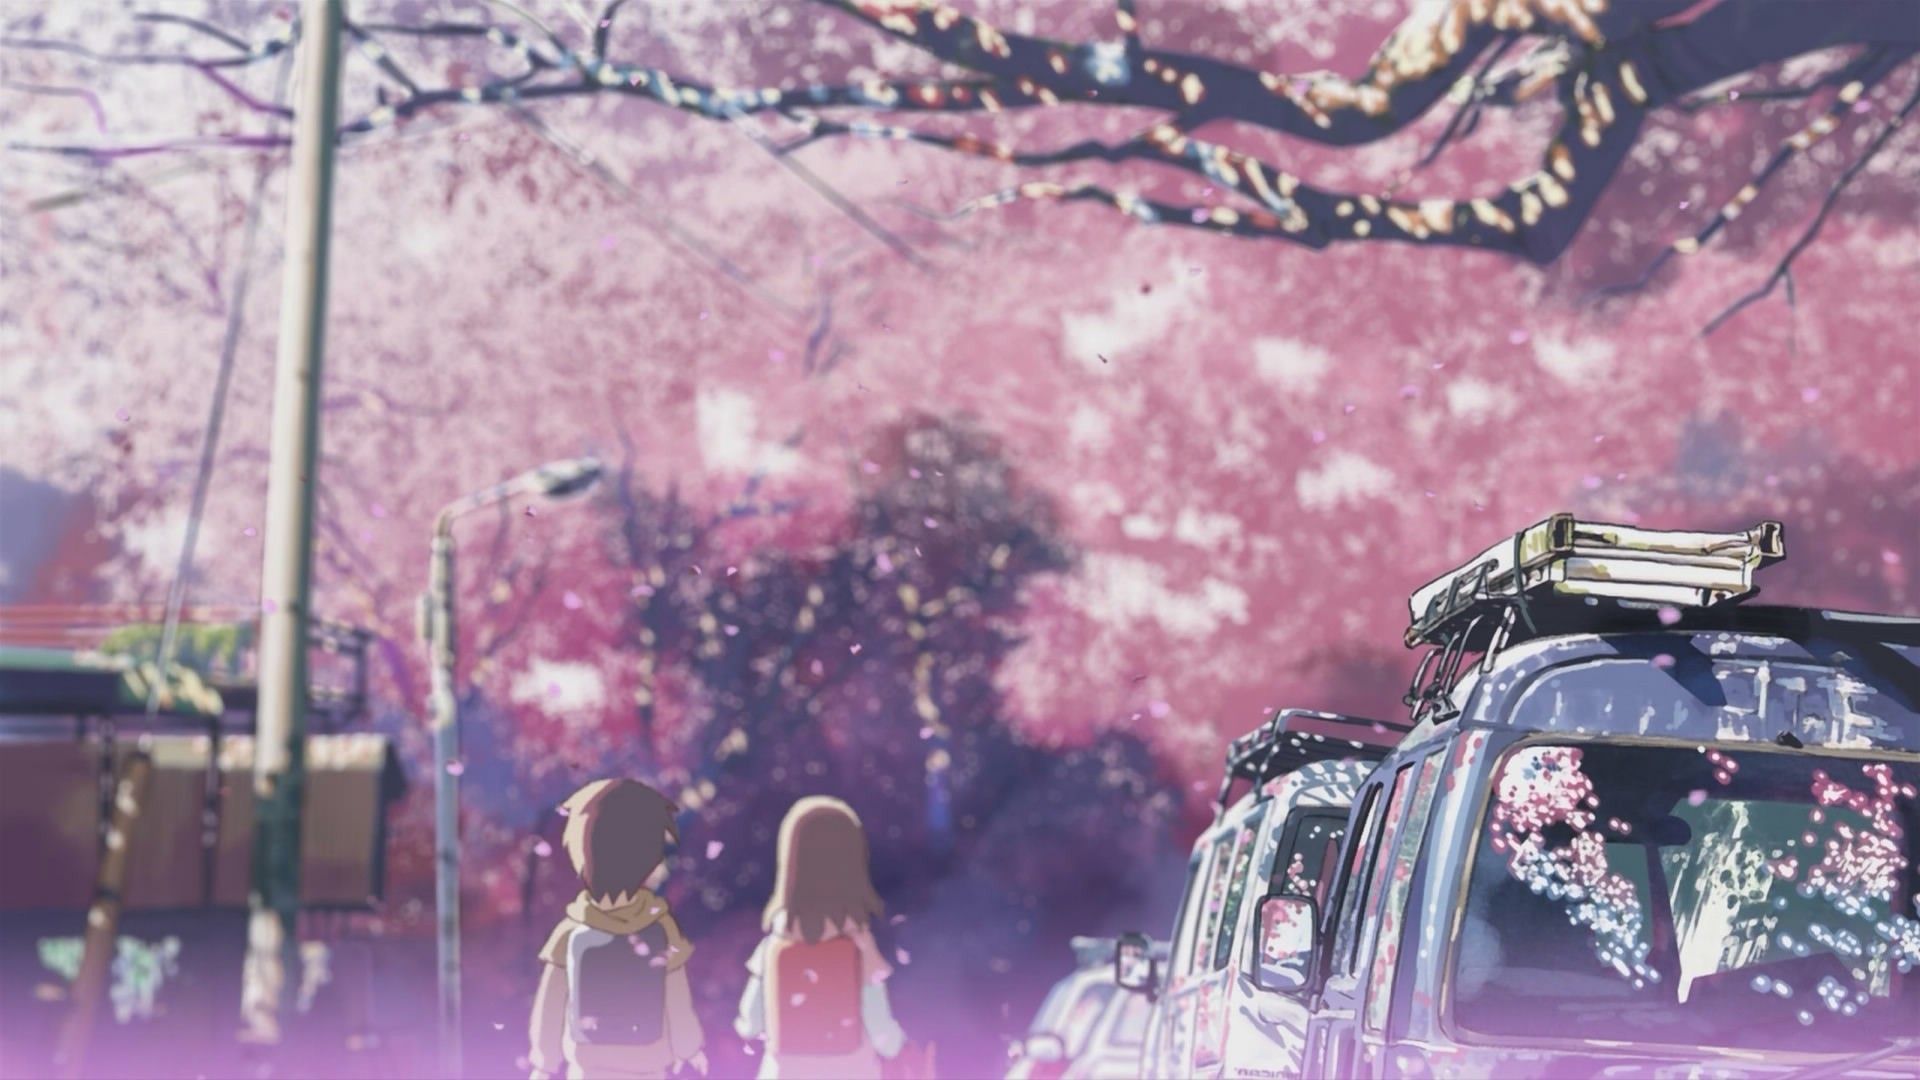 Wallpaper Blink Centimeters Per Second Wallpaper HD 4 X 1080 for Android, Windows, Mac an. Anime wallpaper, HD anime wallpaper, Anime wallpaper iphone